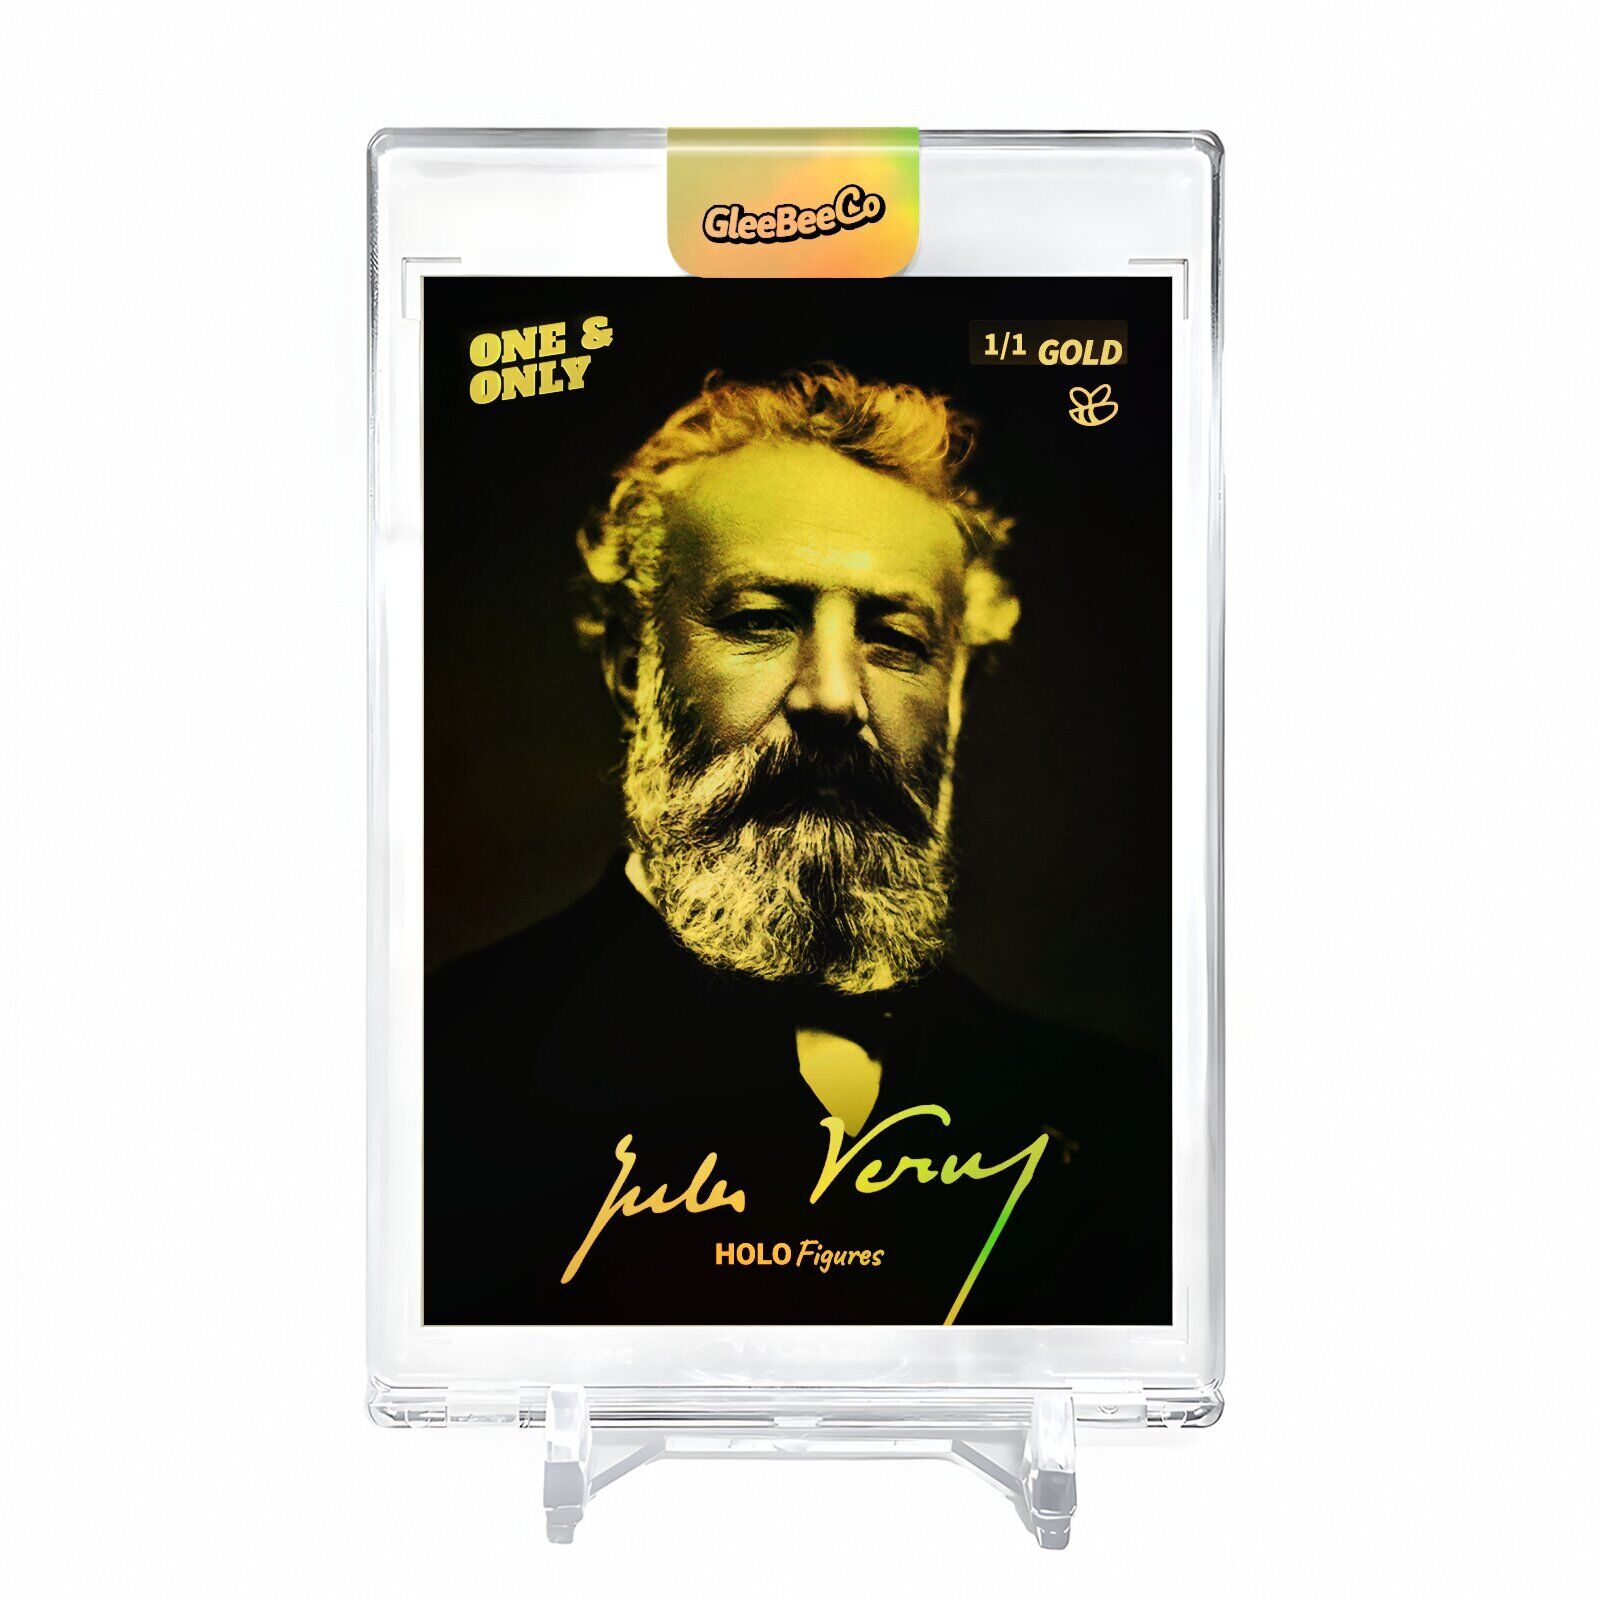 JULES VERNE Holographic Photo Card 2023 GleeBeeCo Holo Figures #JLFT *GOLD* 1/1